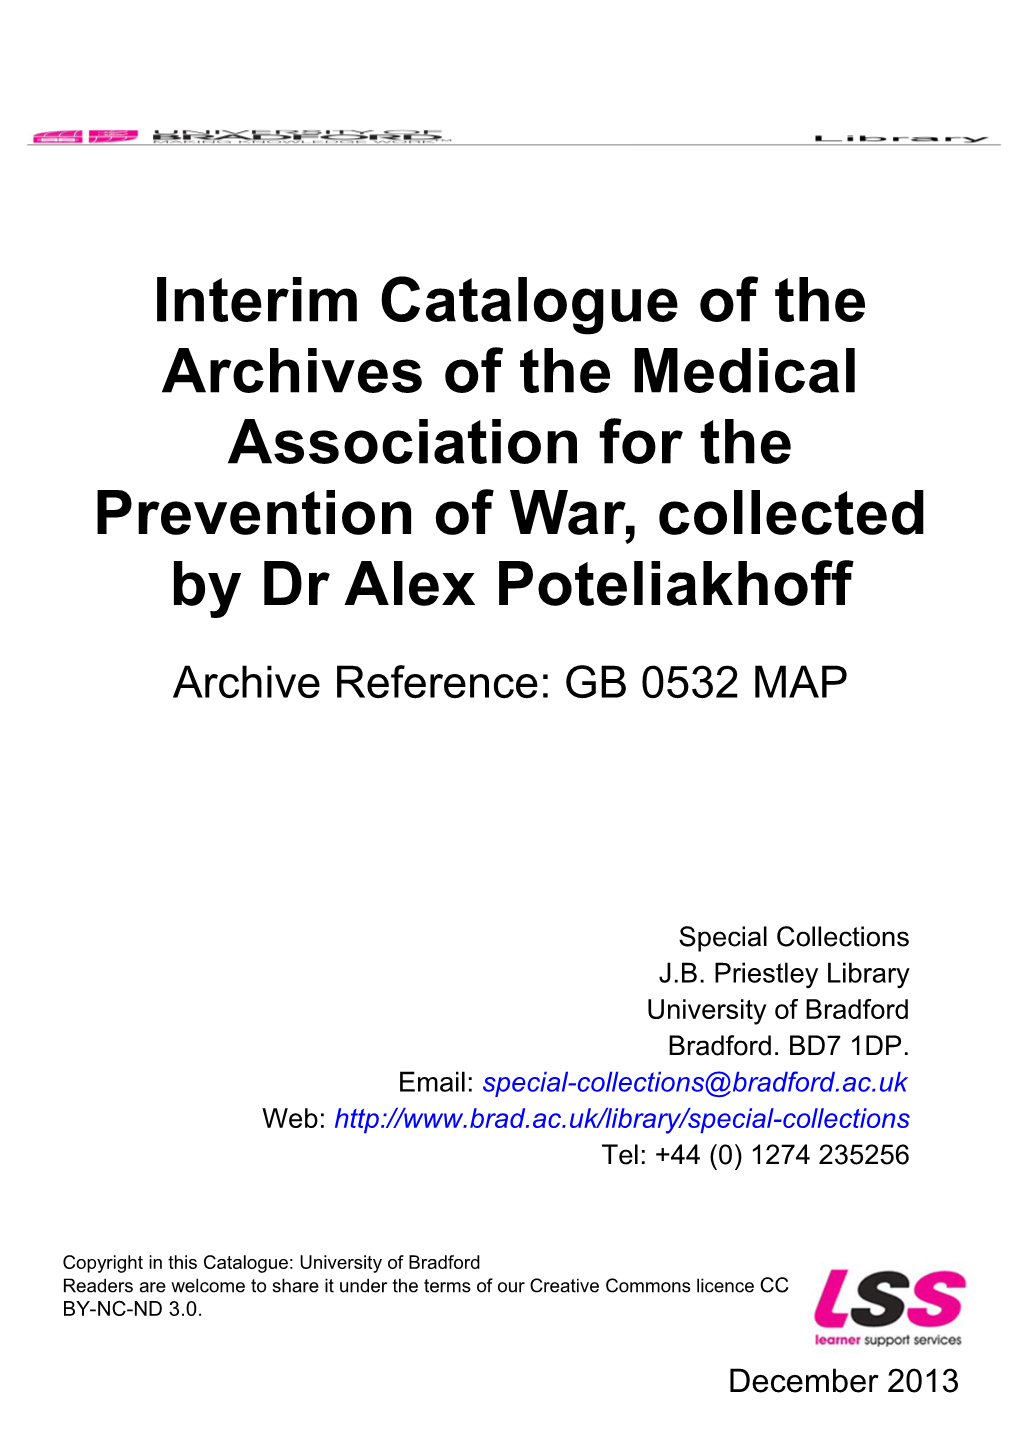 Interim Catalogue of the Archives of the Medical Association for the Prevention of War